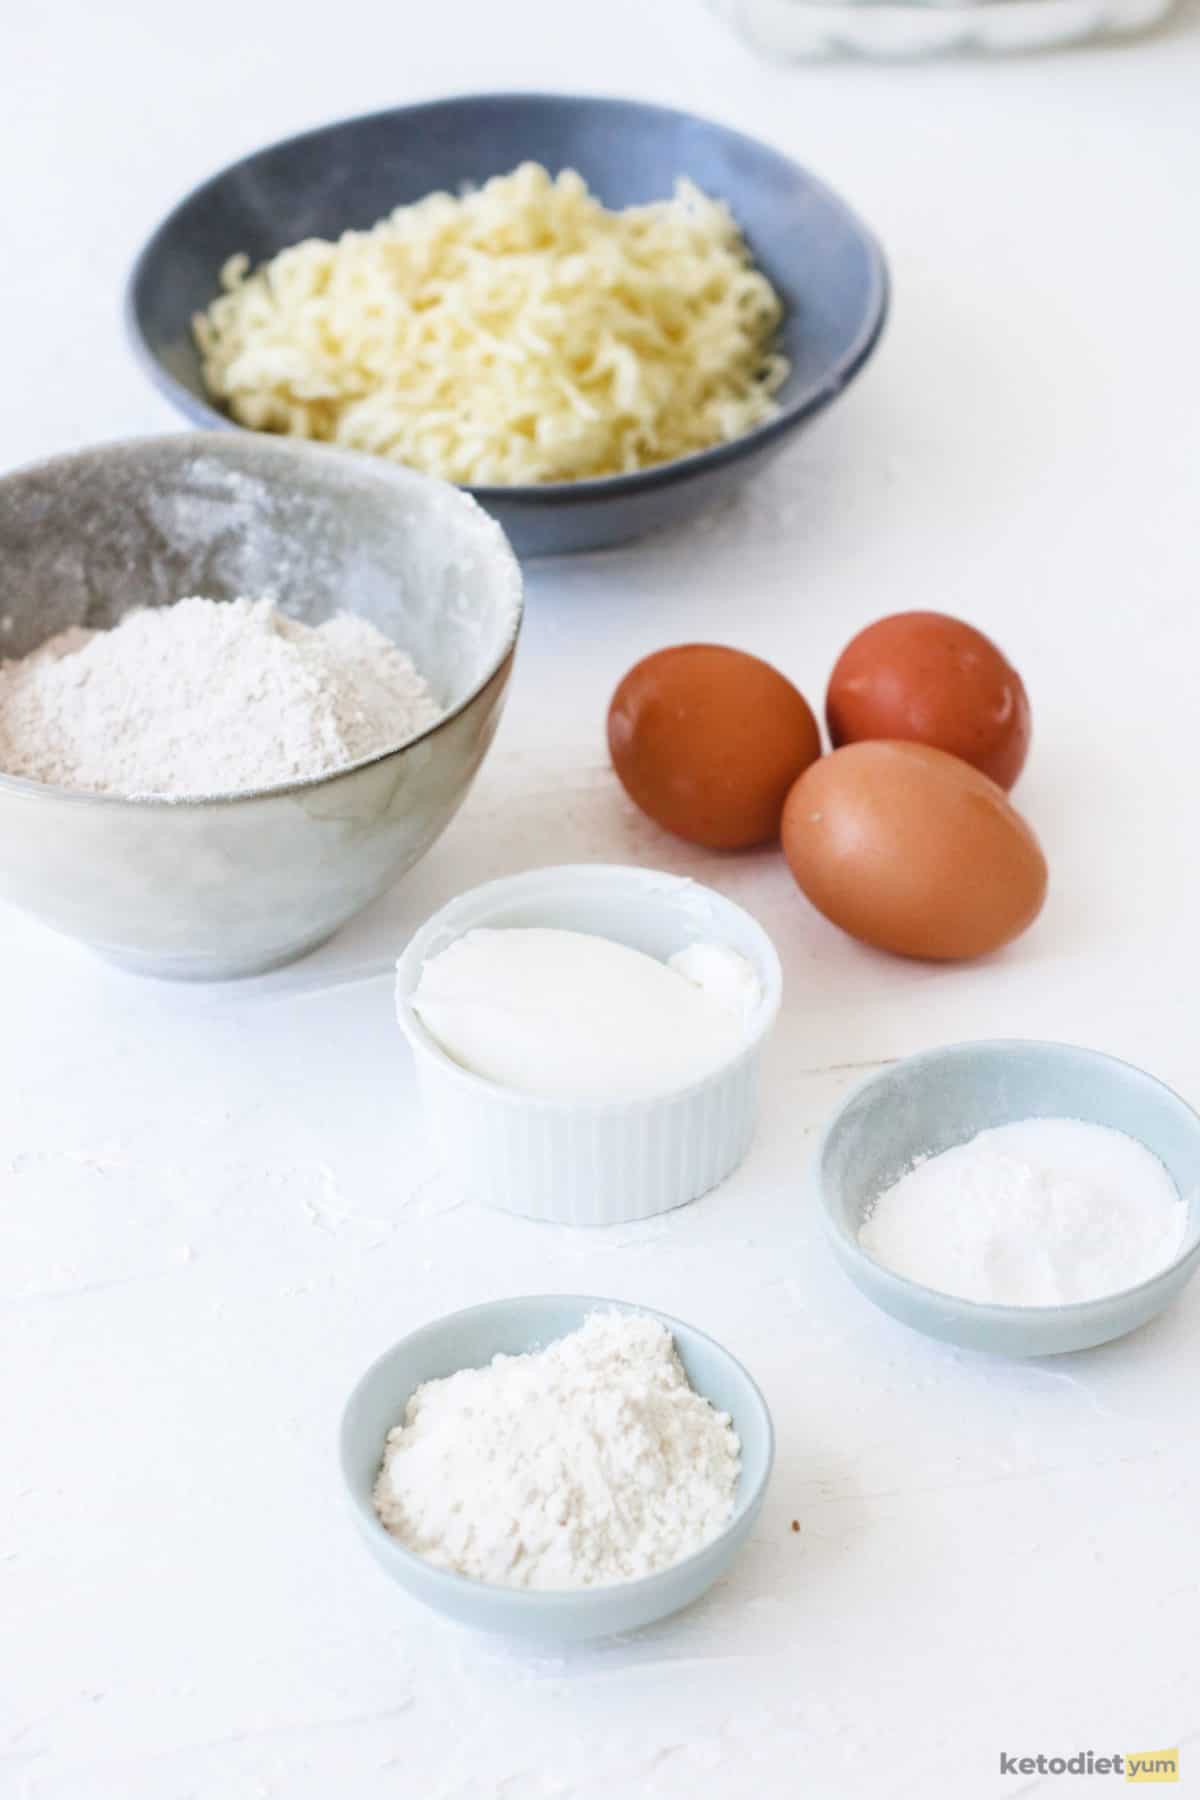 Ingredients arranged on a table to make keto bread rolls including almond flour, coconut flour, cream cheese, mozzarella, eggs and baking powder